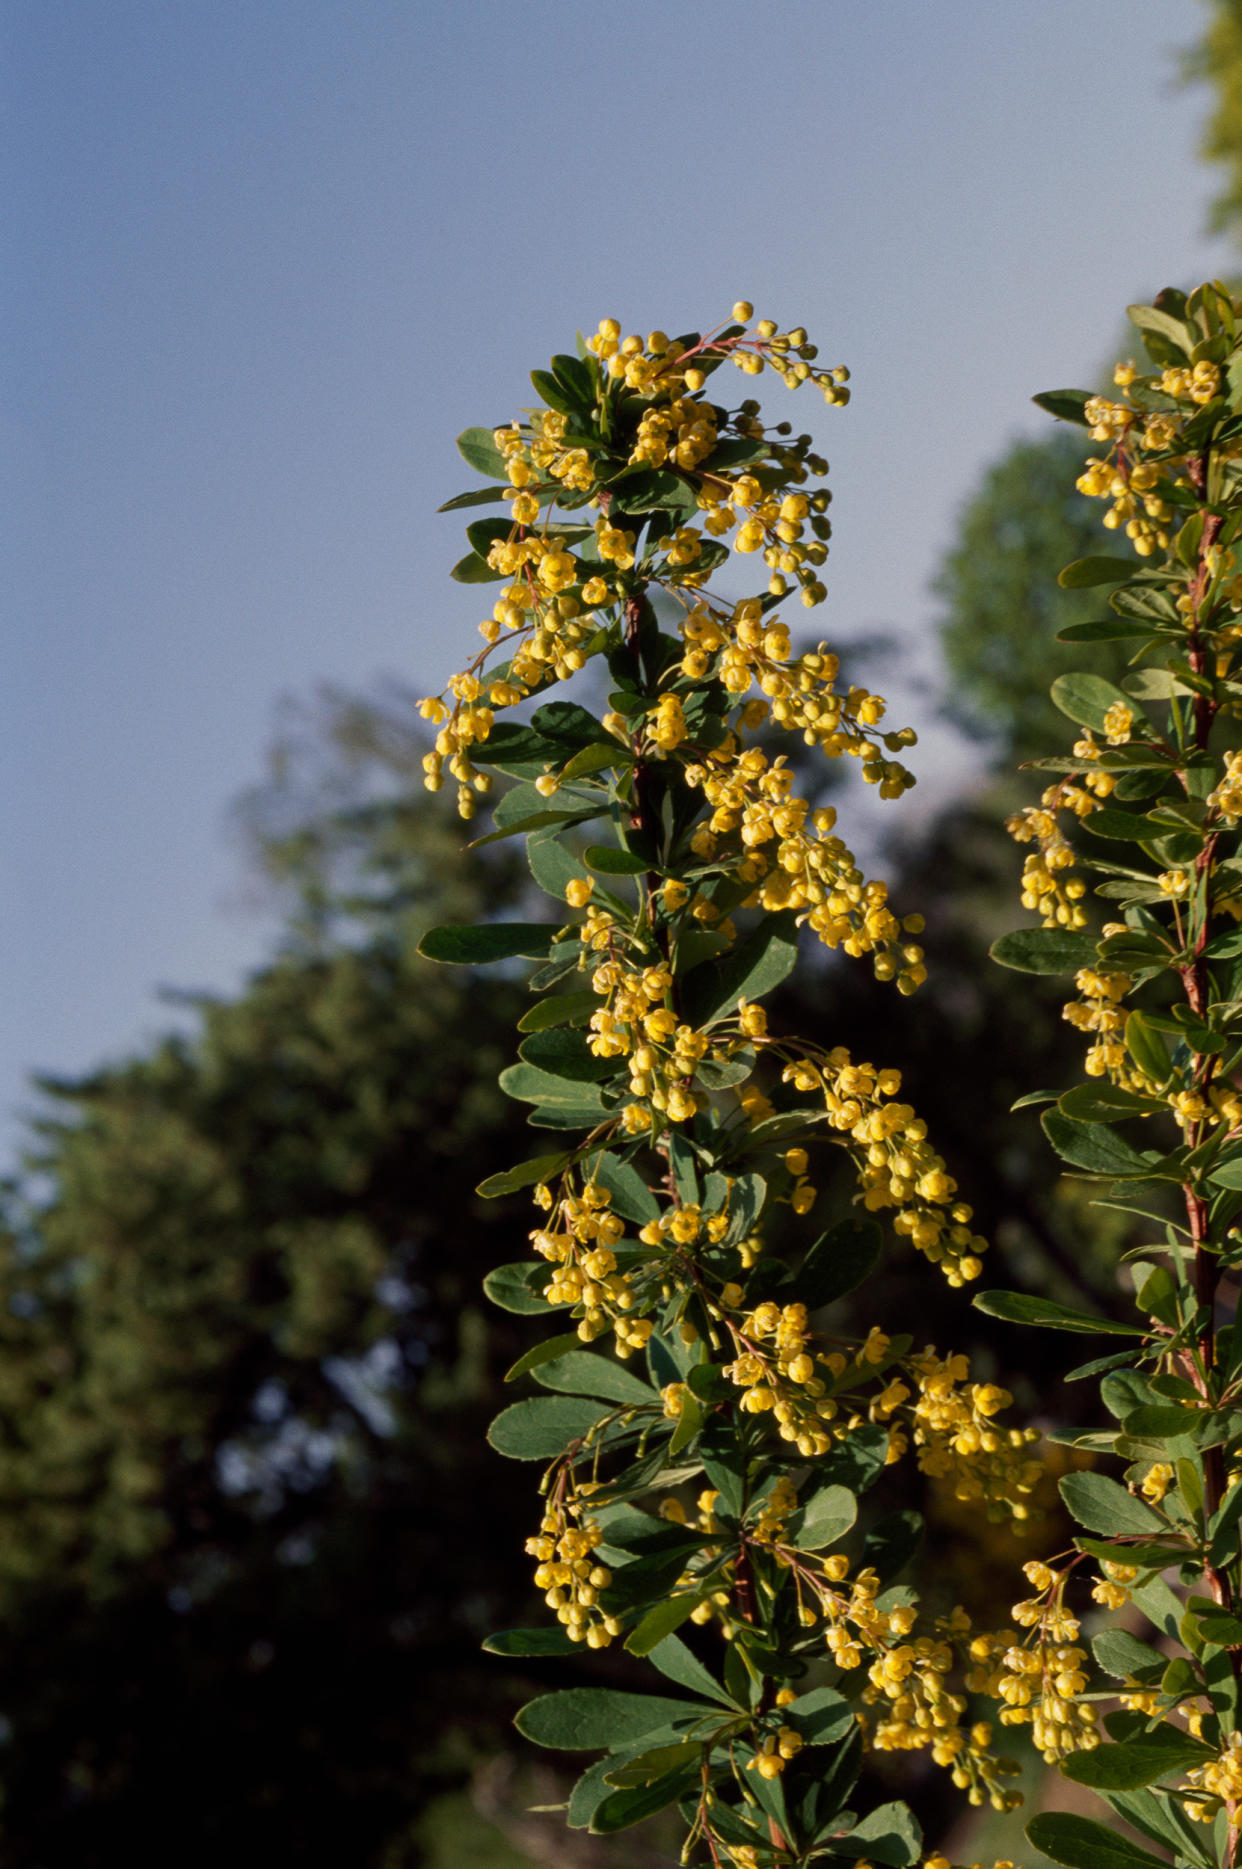 Chinese Barberry, Berberidaceae (De Agostini via Getty Images)